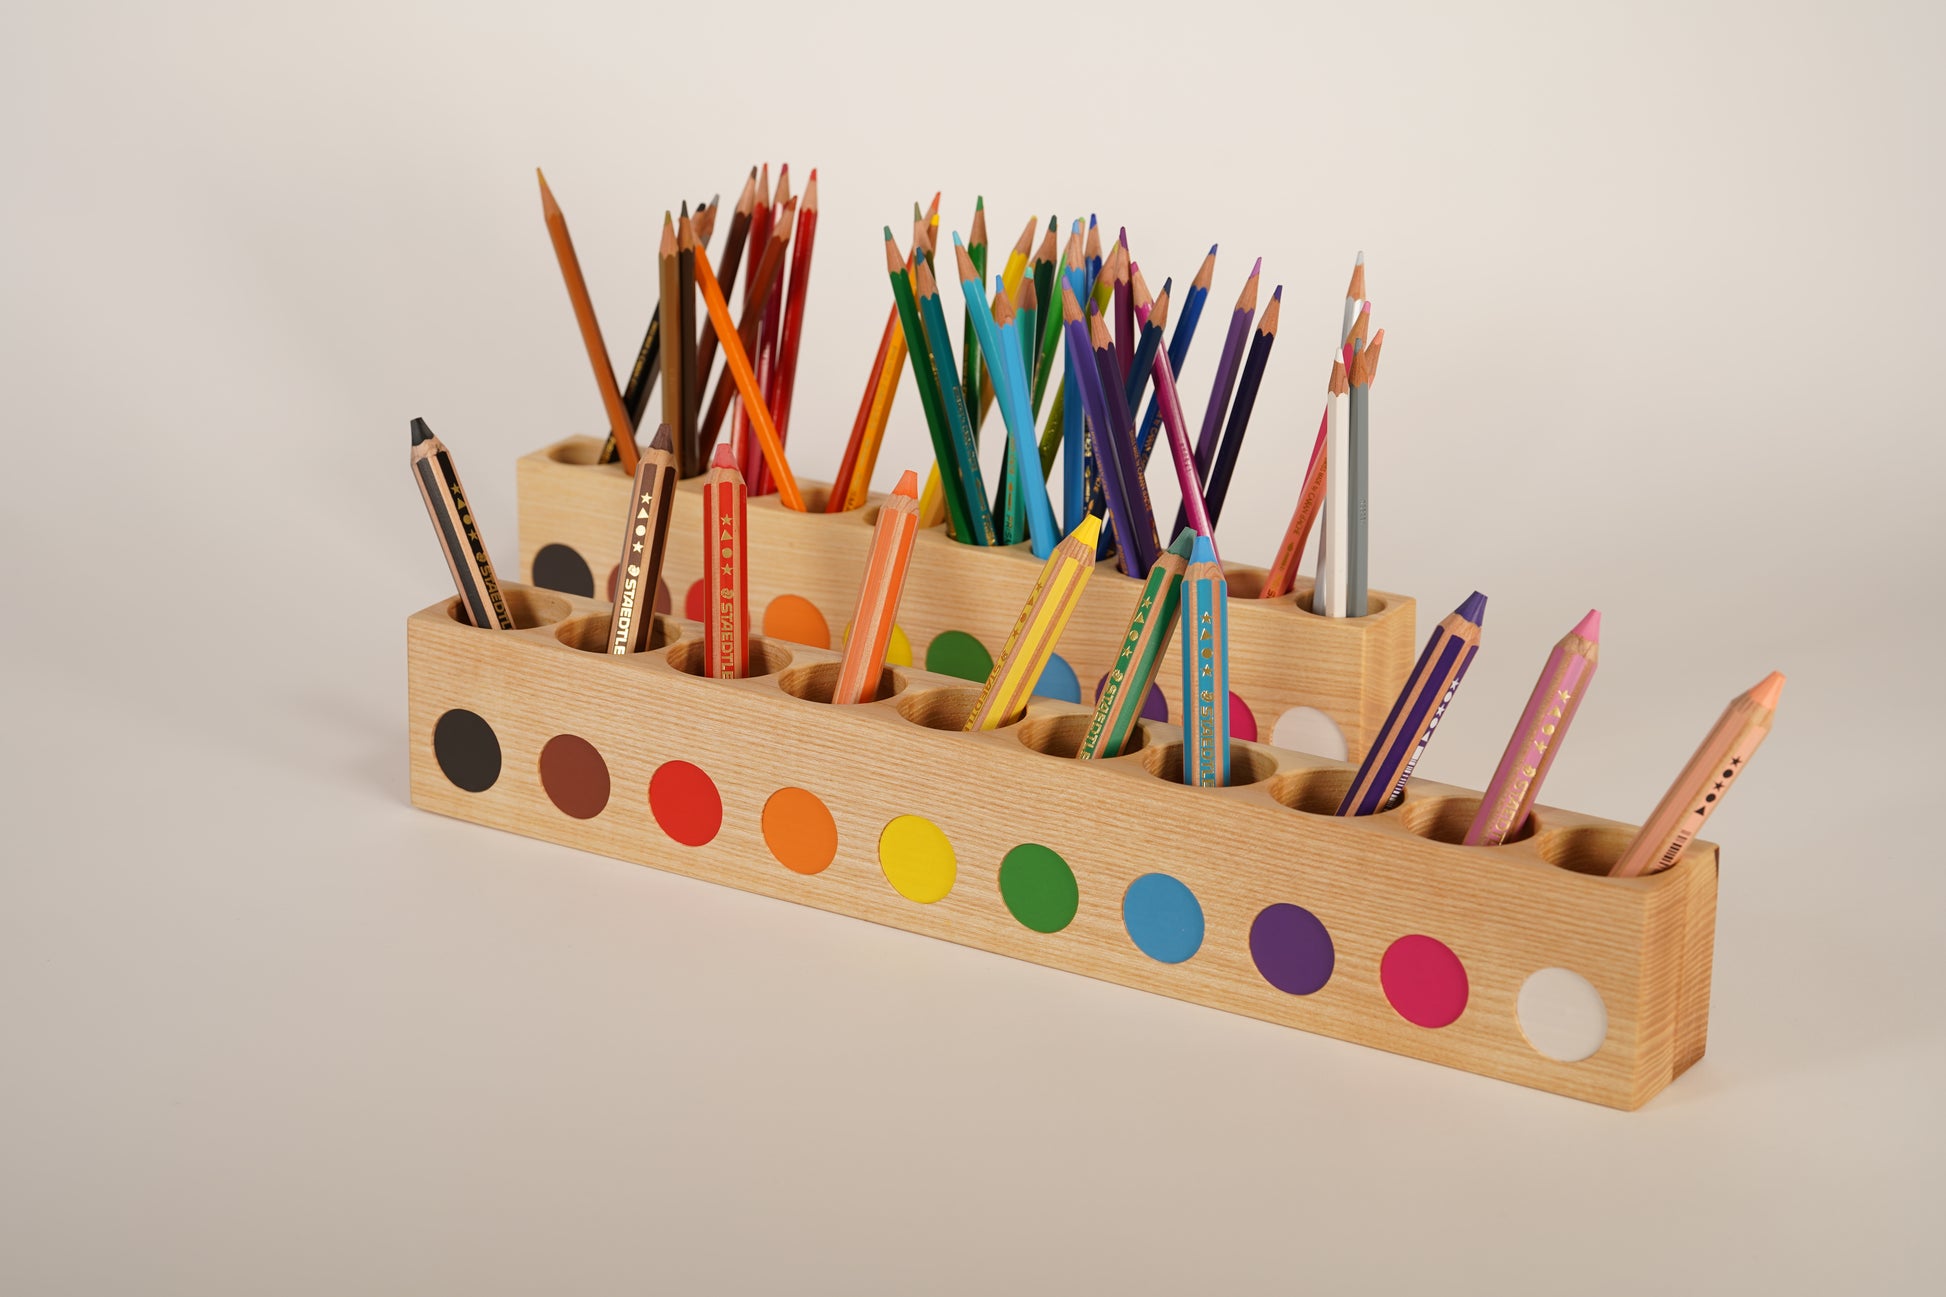 Large montessori pencil holder, with staedtler noris pencils for small kids, compared to regular pencil holder side angled view